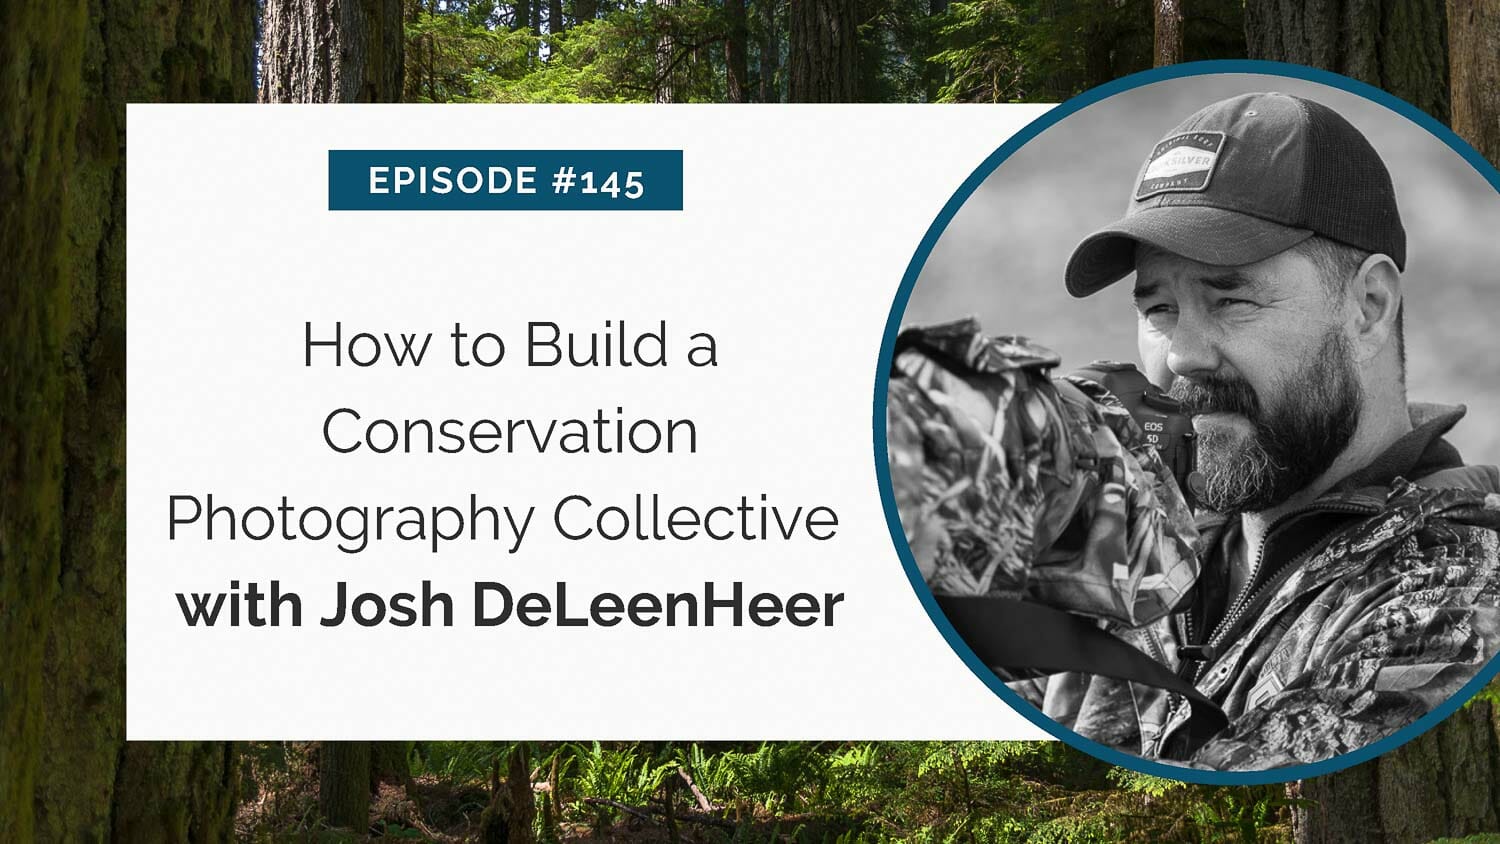 Episode #145 - man in camouflage discussing the creation of a conservation photography collective with josh deleenheer amidst a forest backdrop.